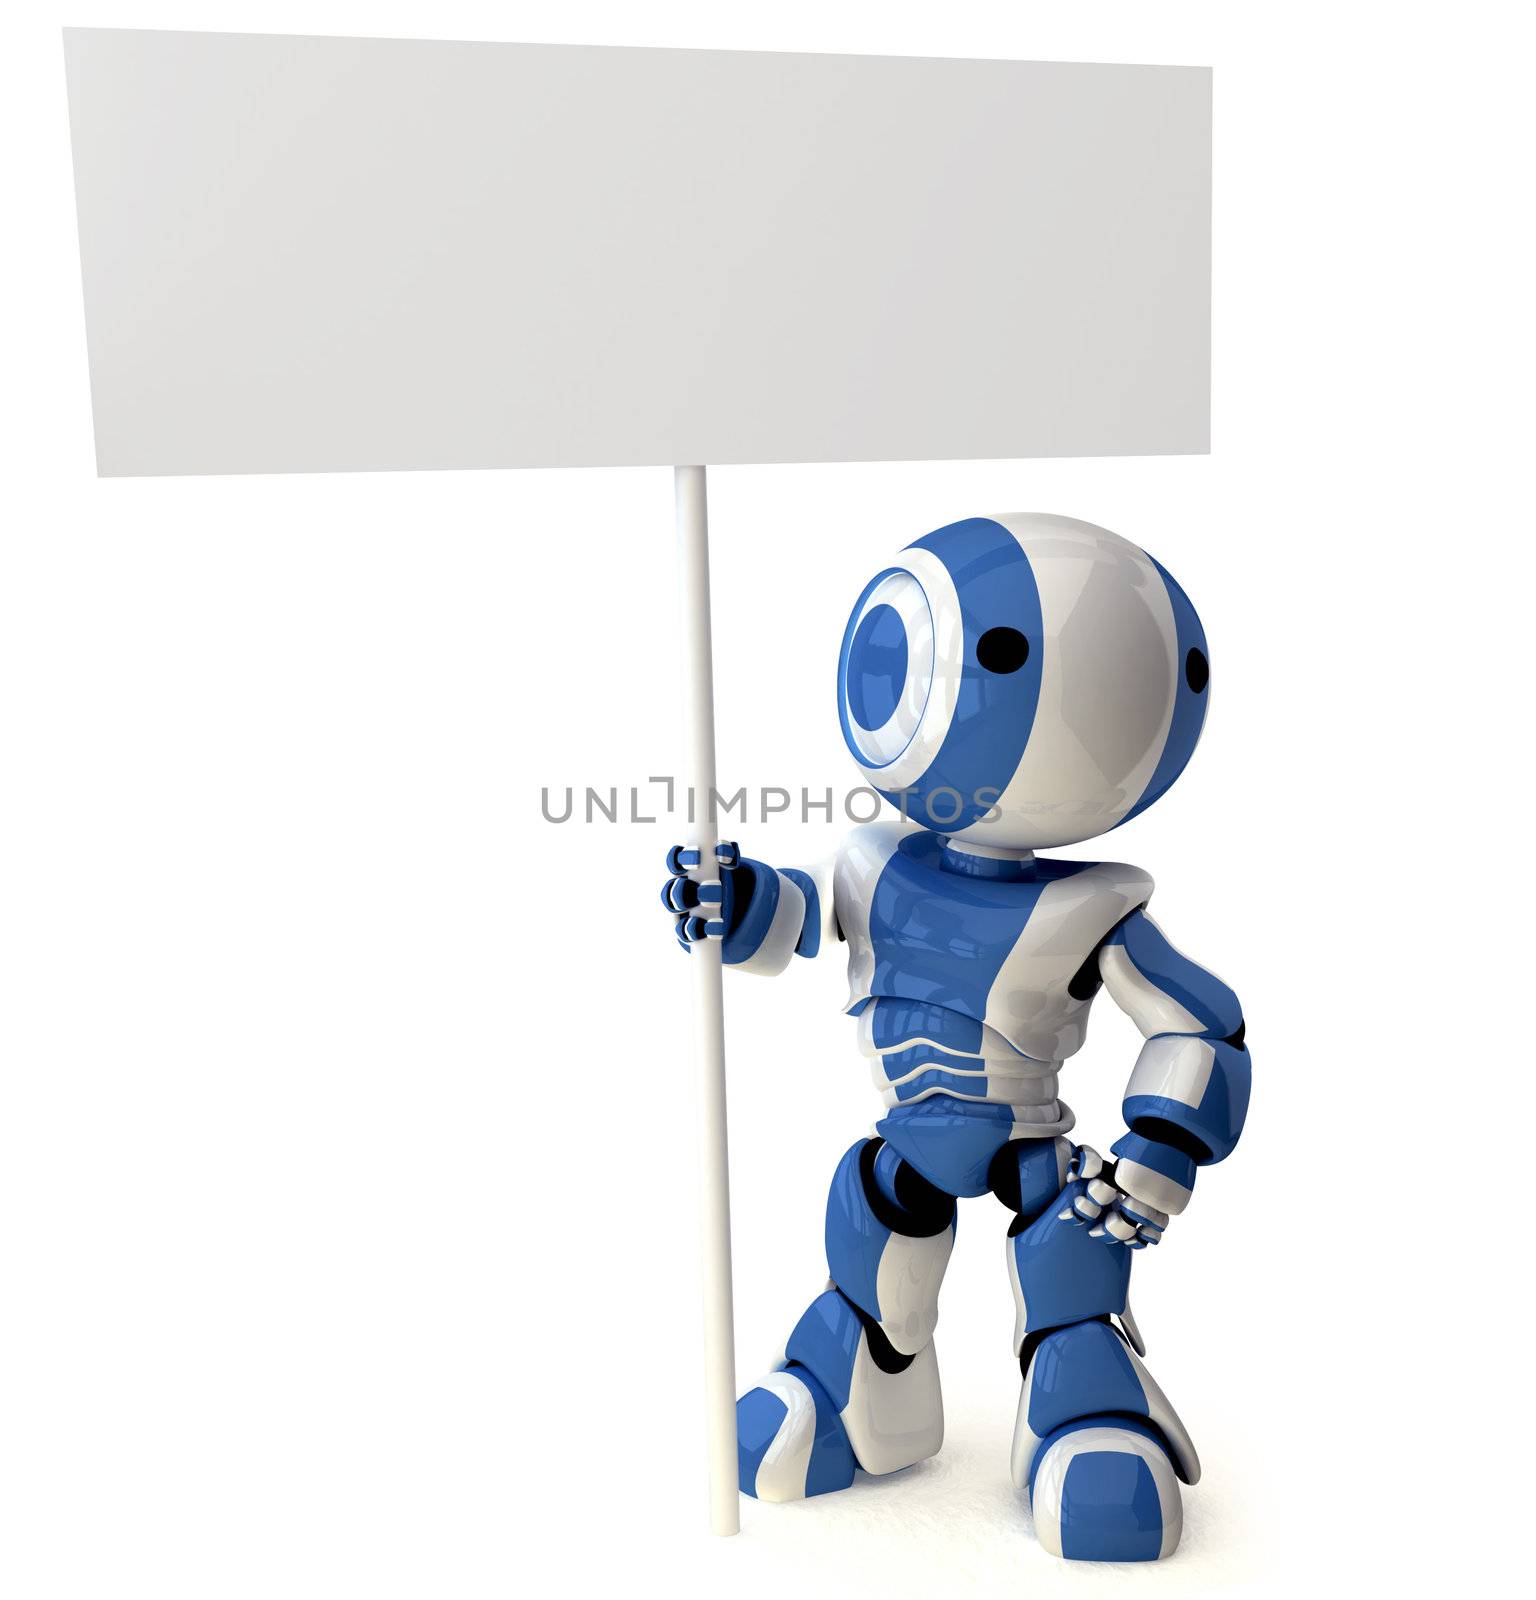 Glossy Blue Robot Standing Holding Sign by LeoBlanchette